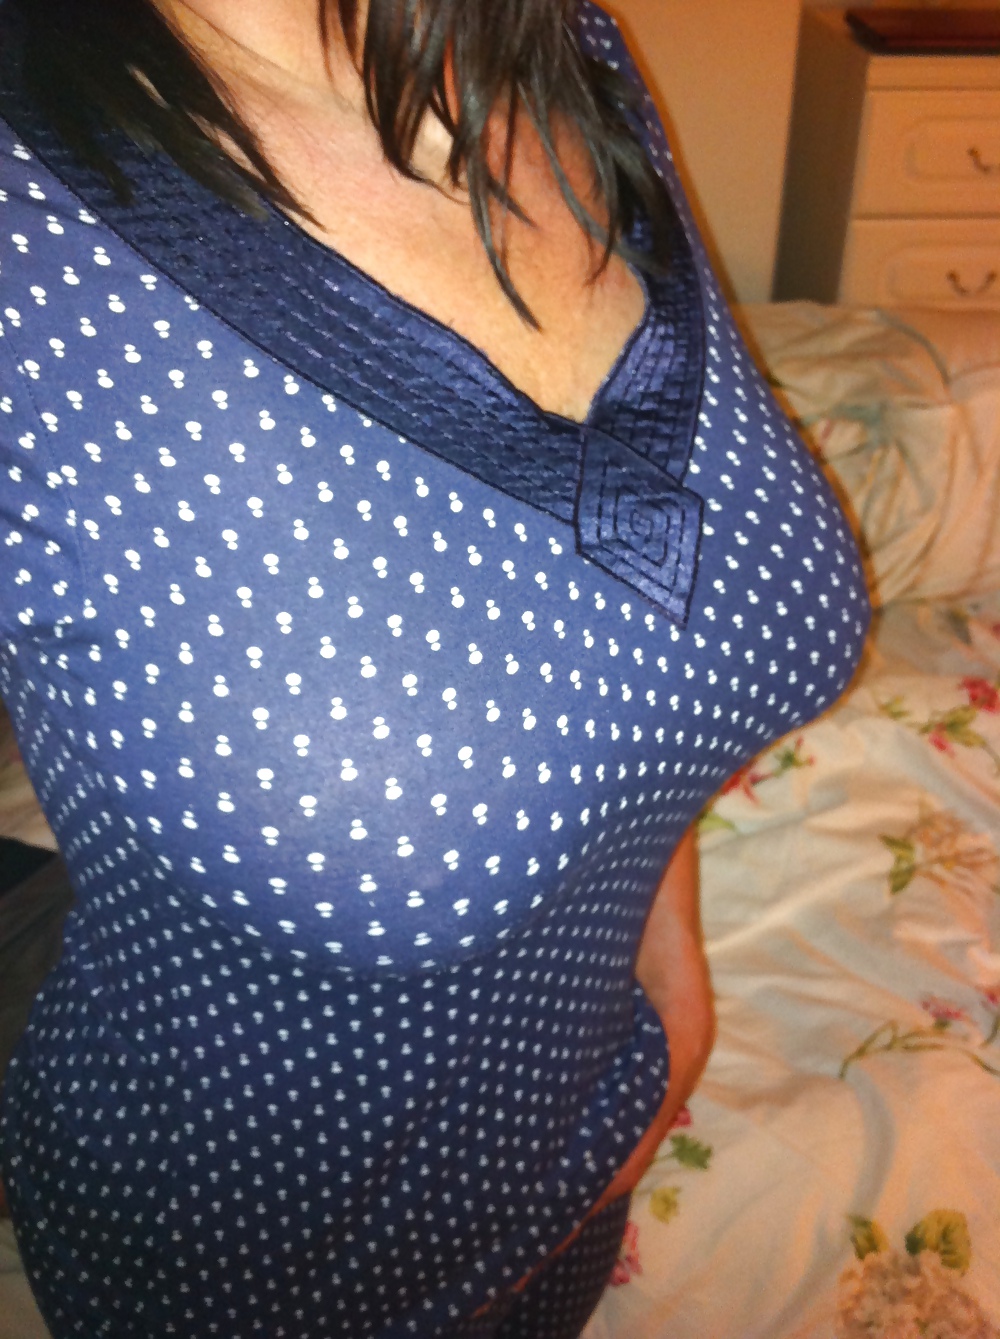 gf,s sexy big tits ready for bed adult photos